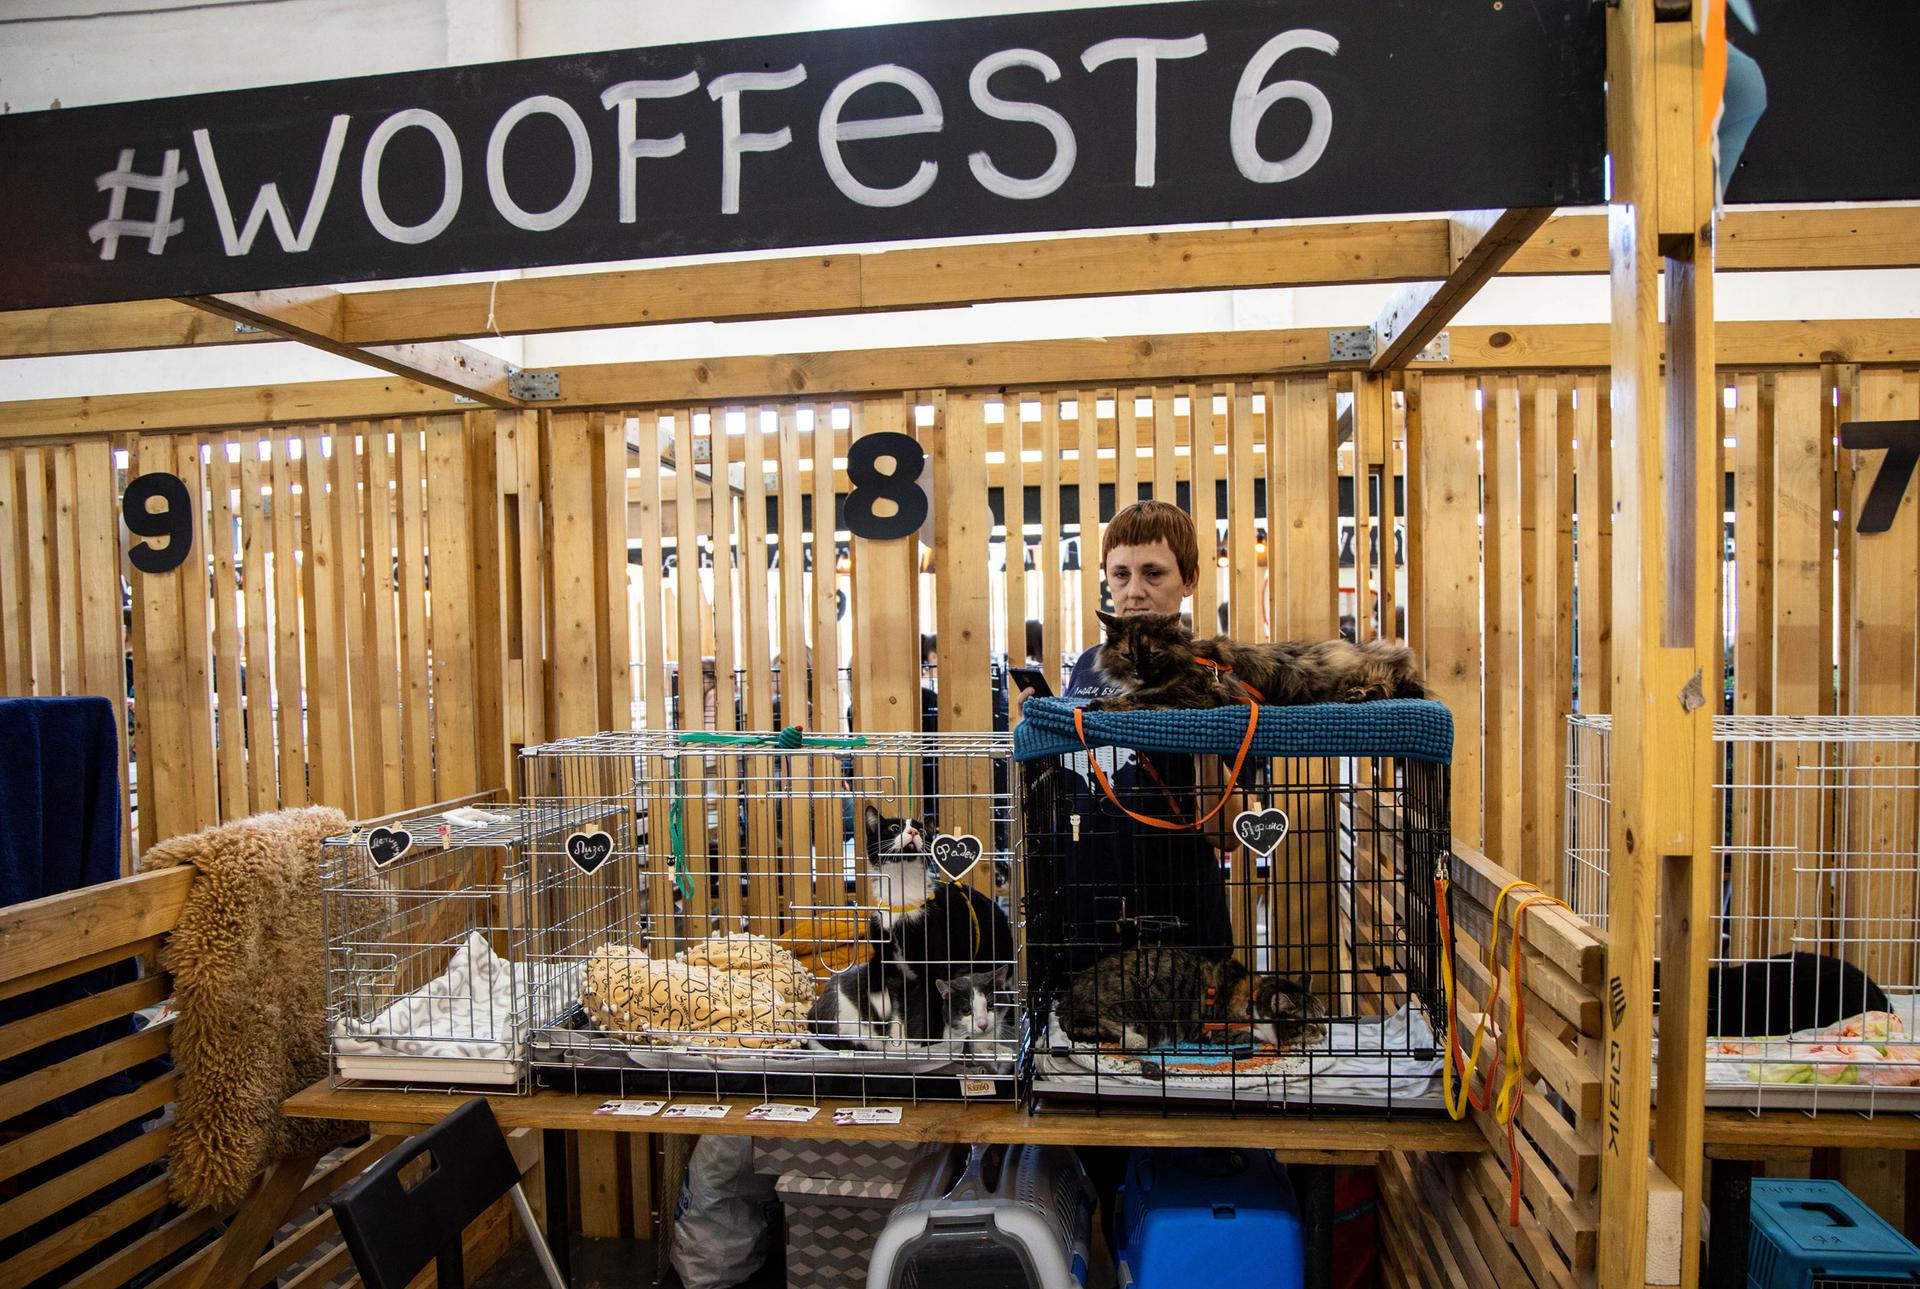 A woman is shown standing behind three cats in cages below a wooden sign that says, 